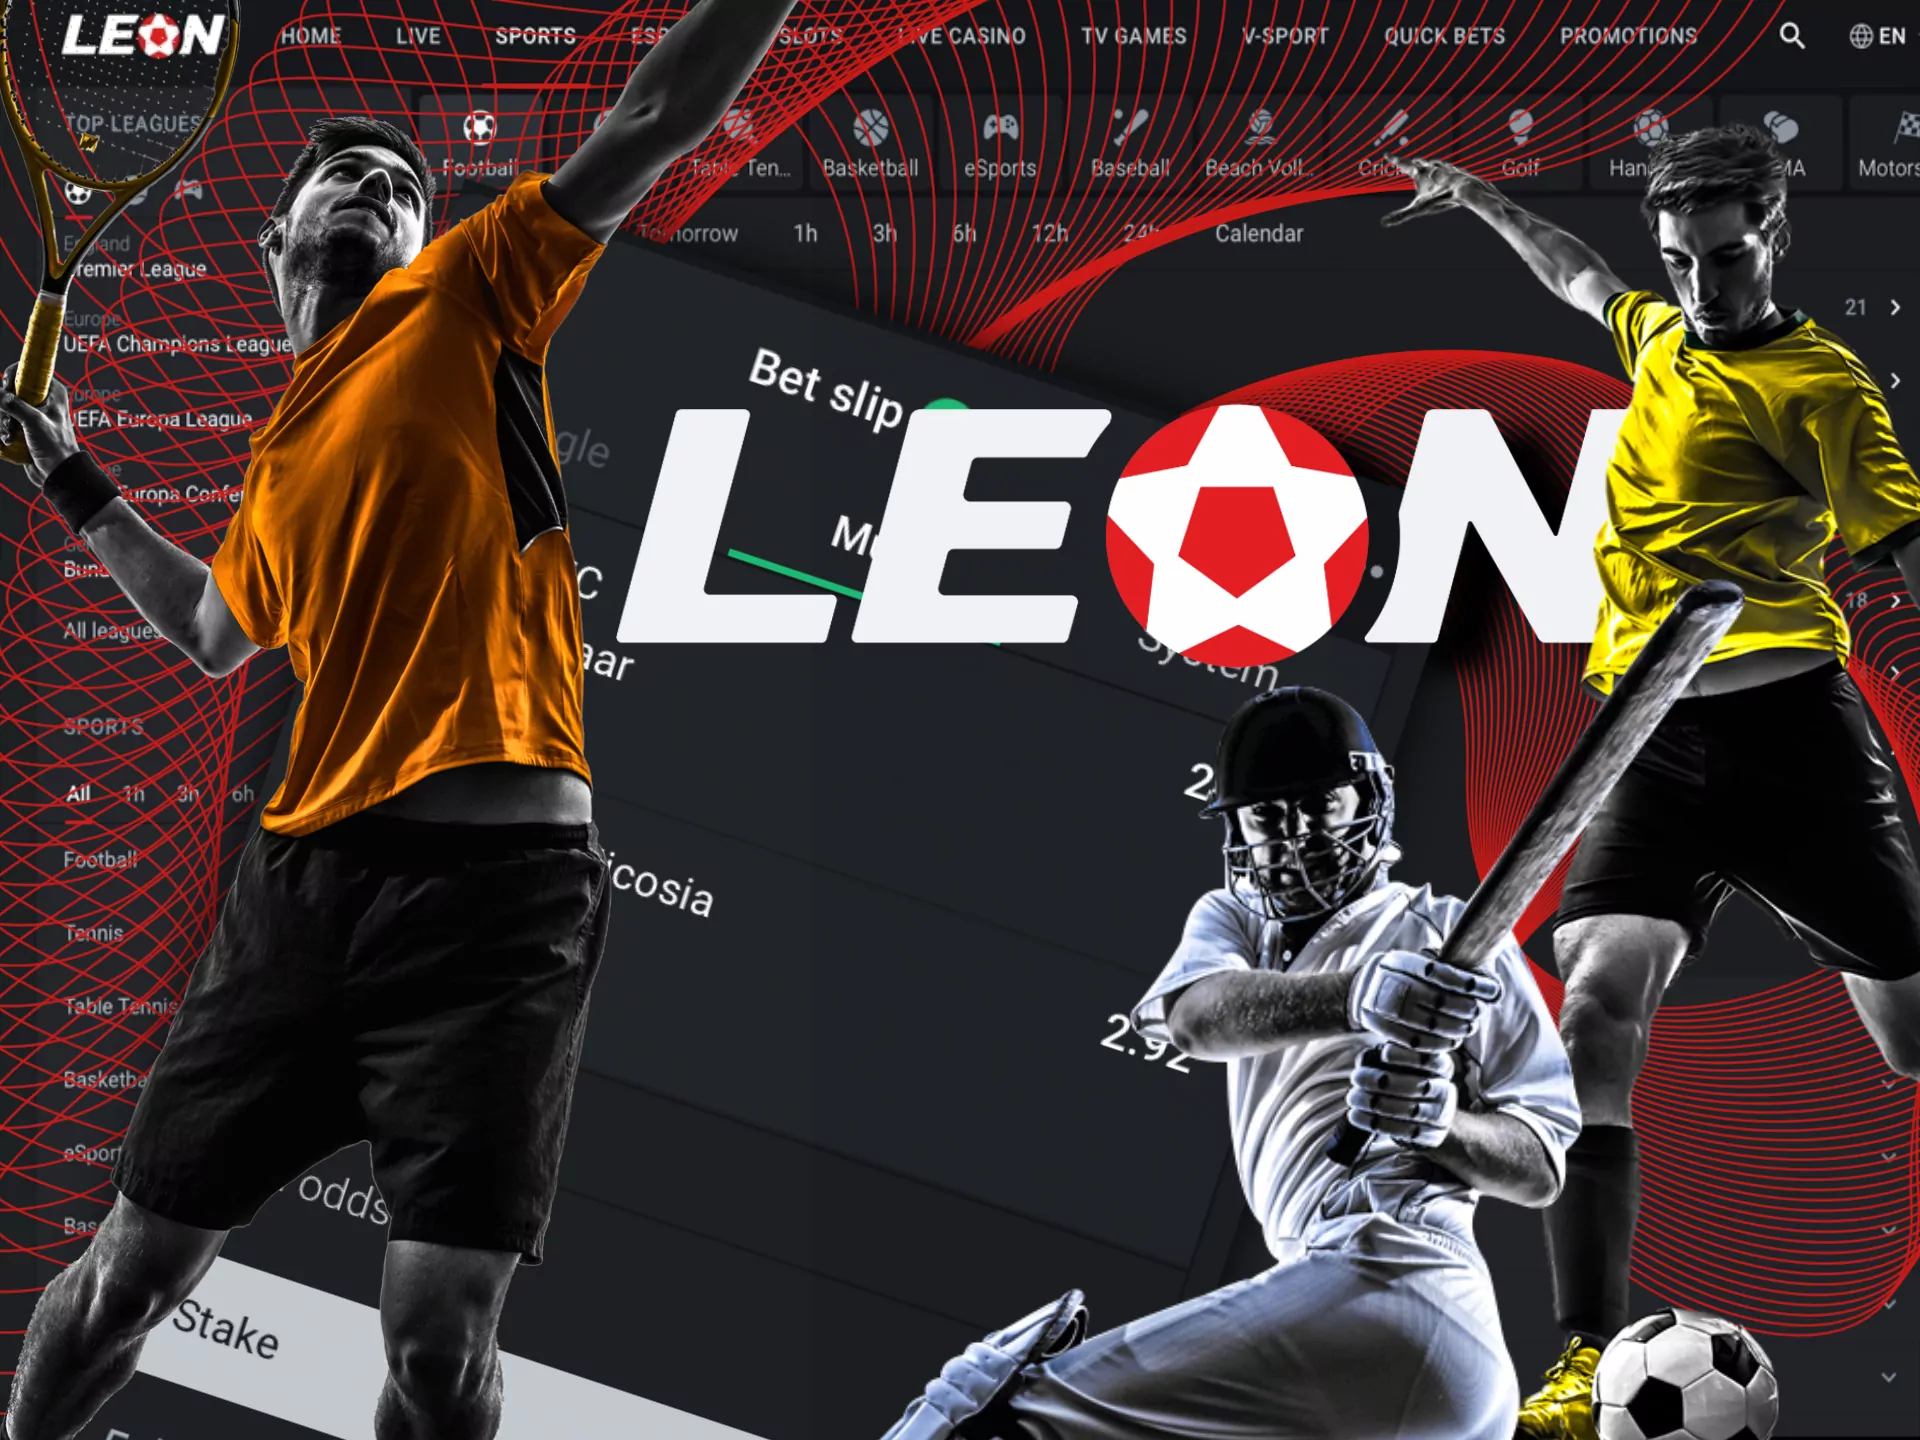 You can find a lot of sports events, markets for bettong in the Leon sportsbook.